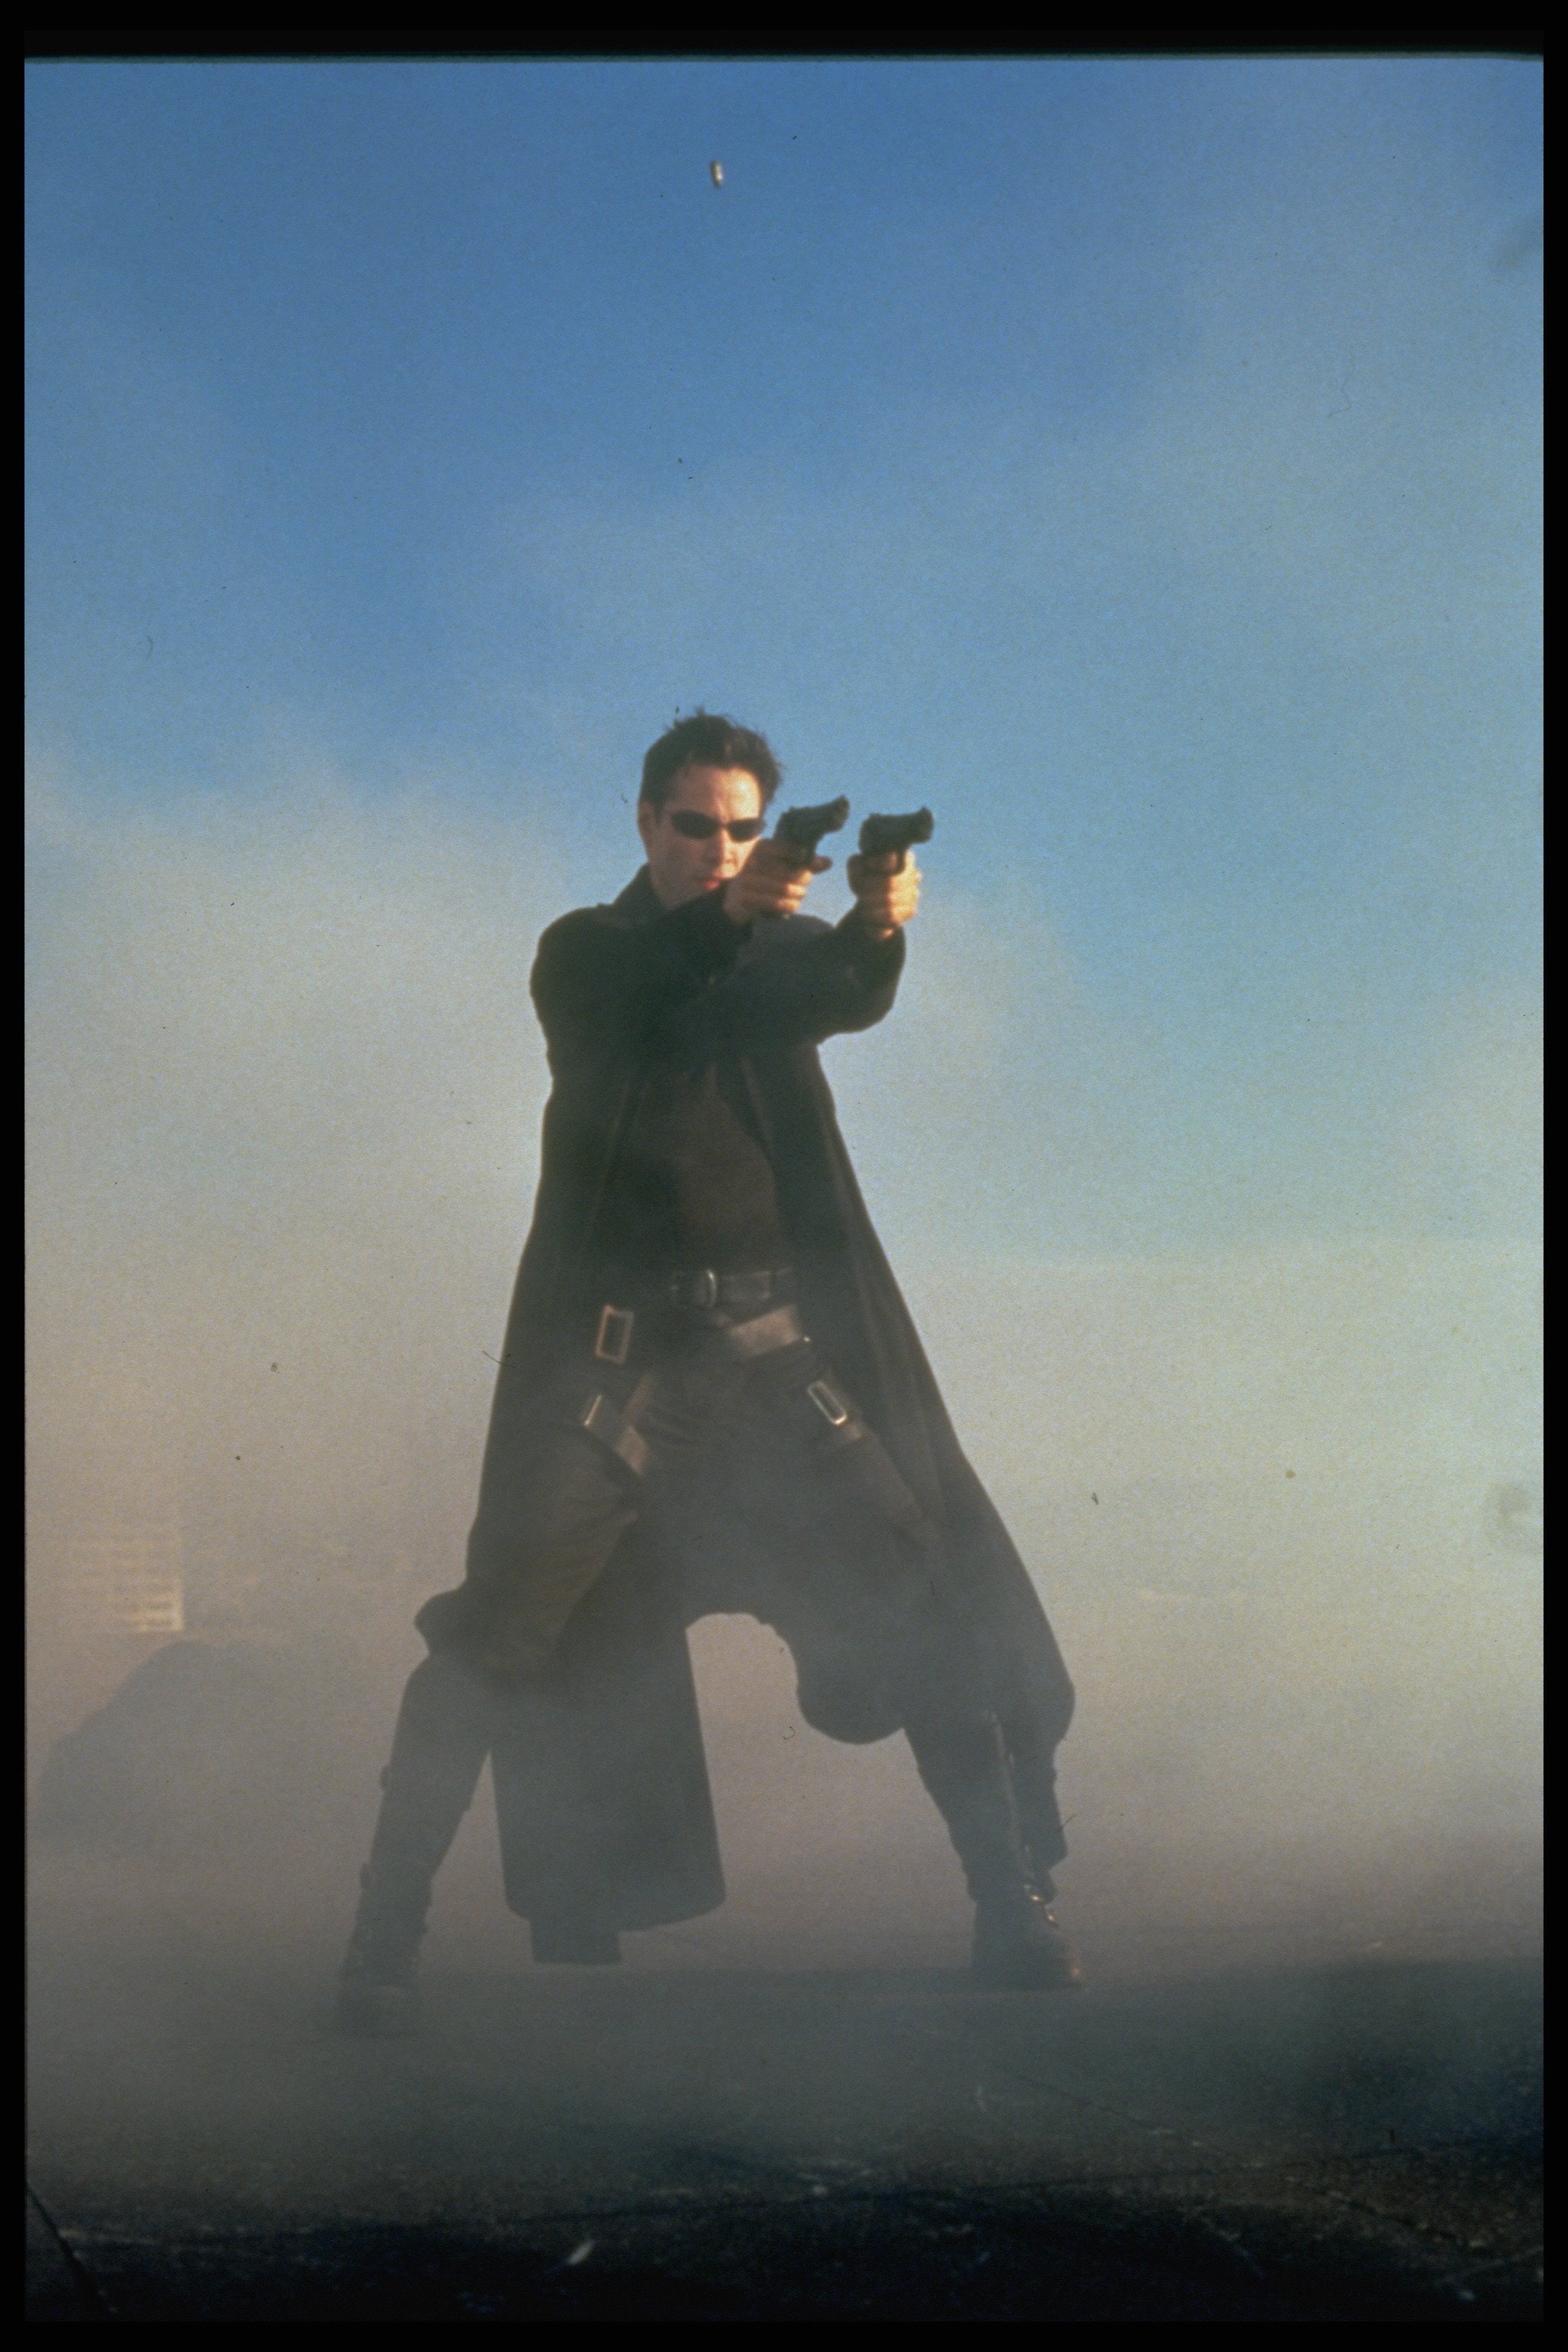 Keanu Reeves fires two guns on the rooftop in The Matrix